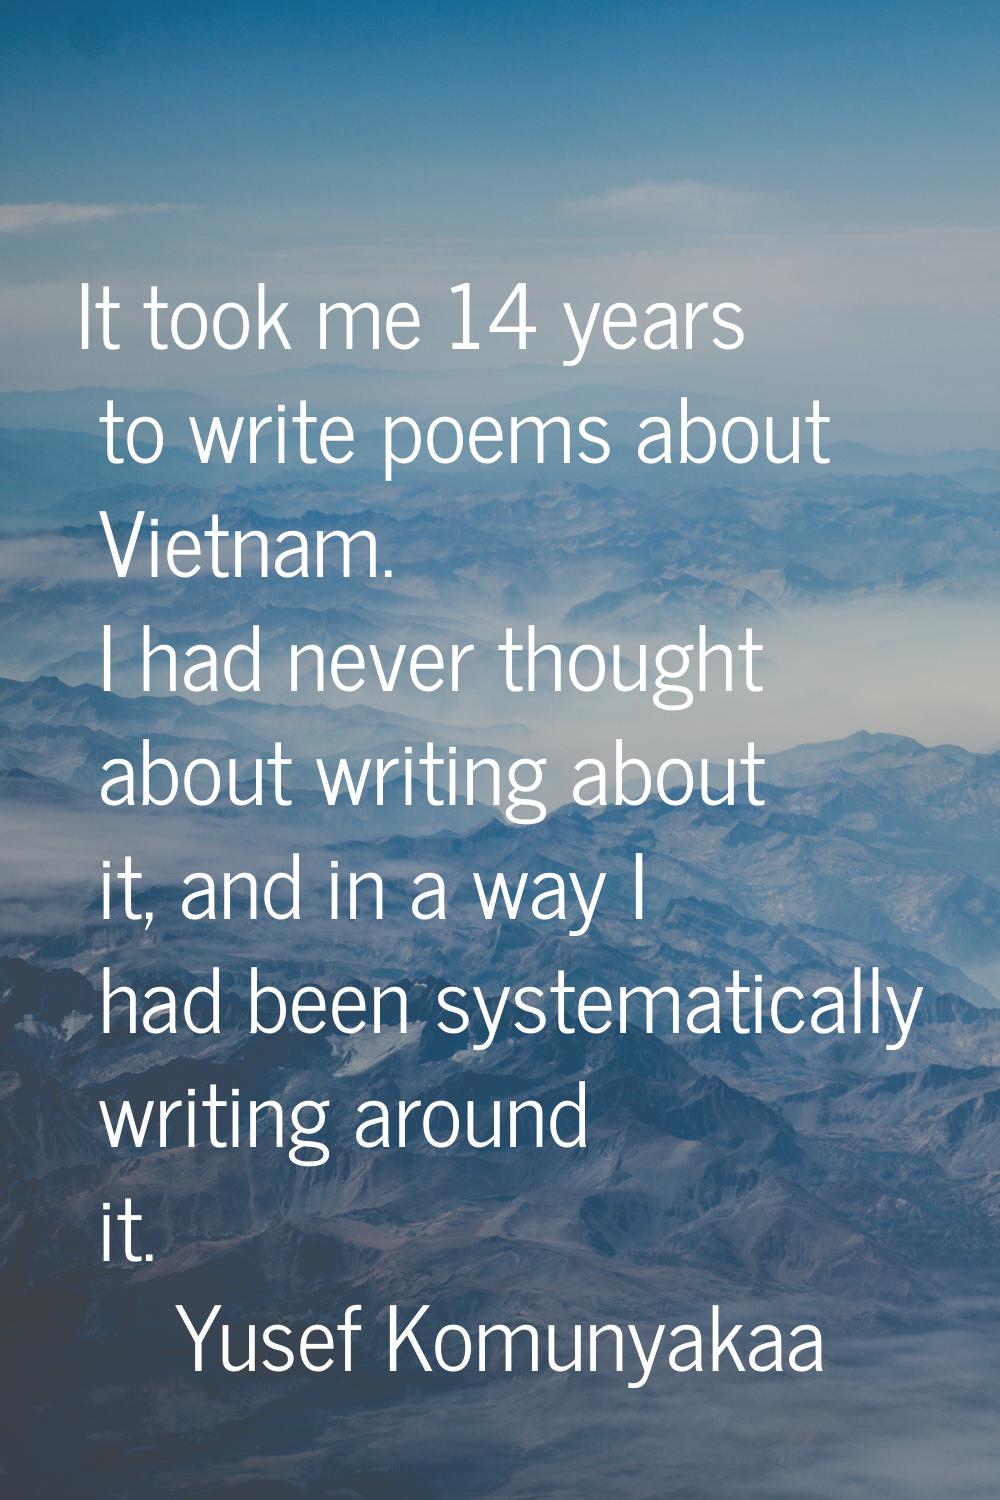 It took me 14 years to write poems about Vietnam. I had never thought about writing about it, and i